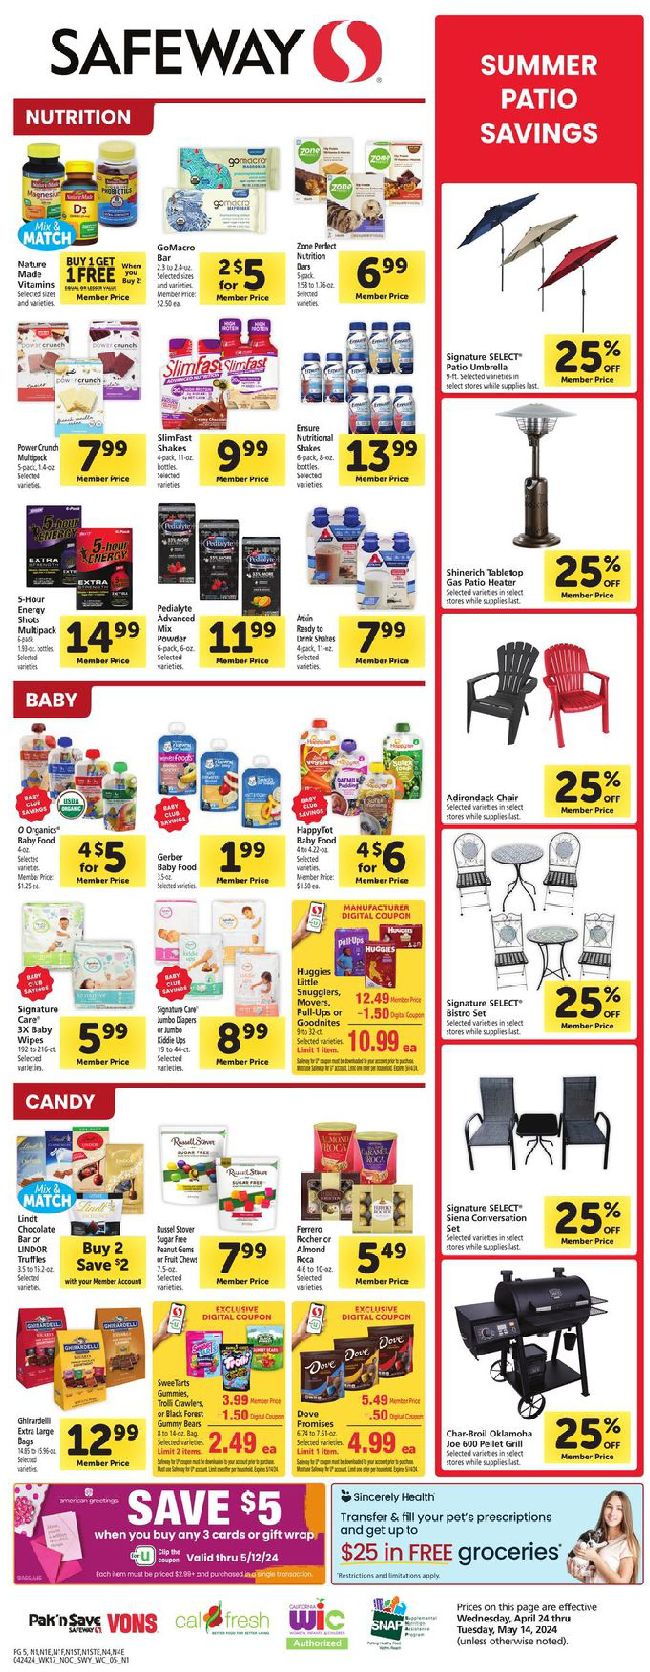 Safeway Weekly Ad Preview 24_April_24 Page 5